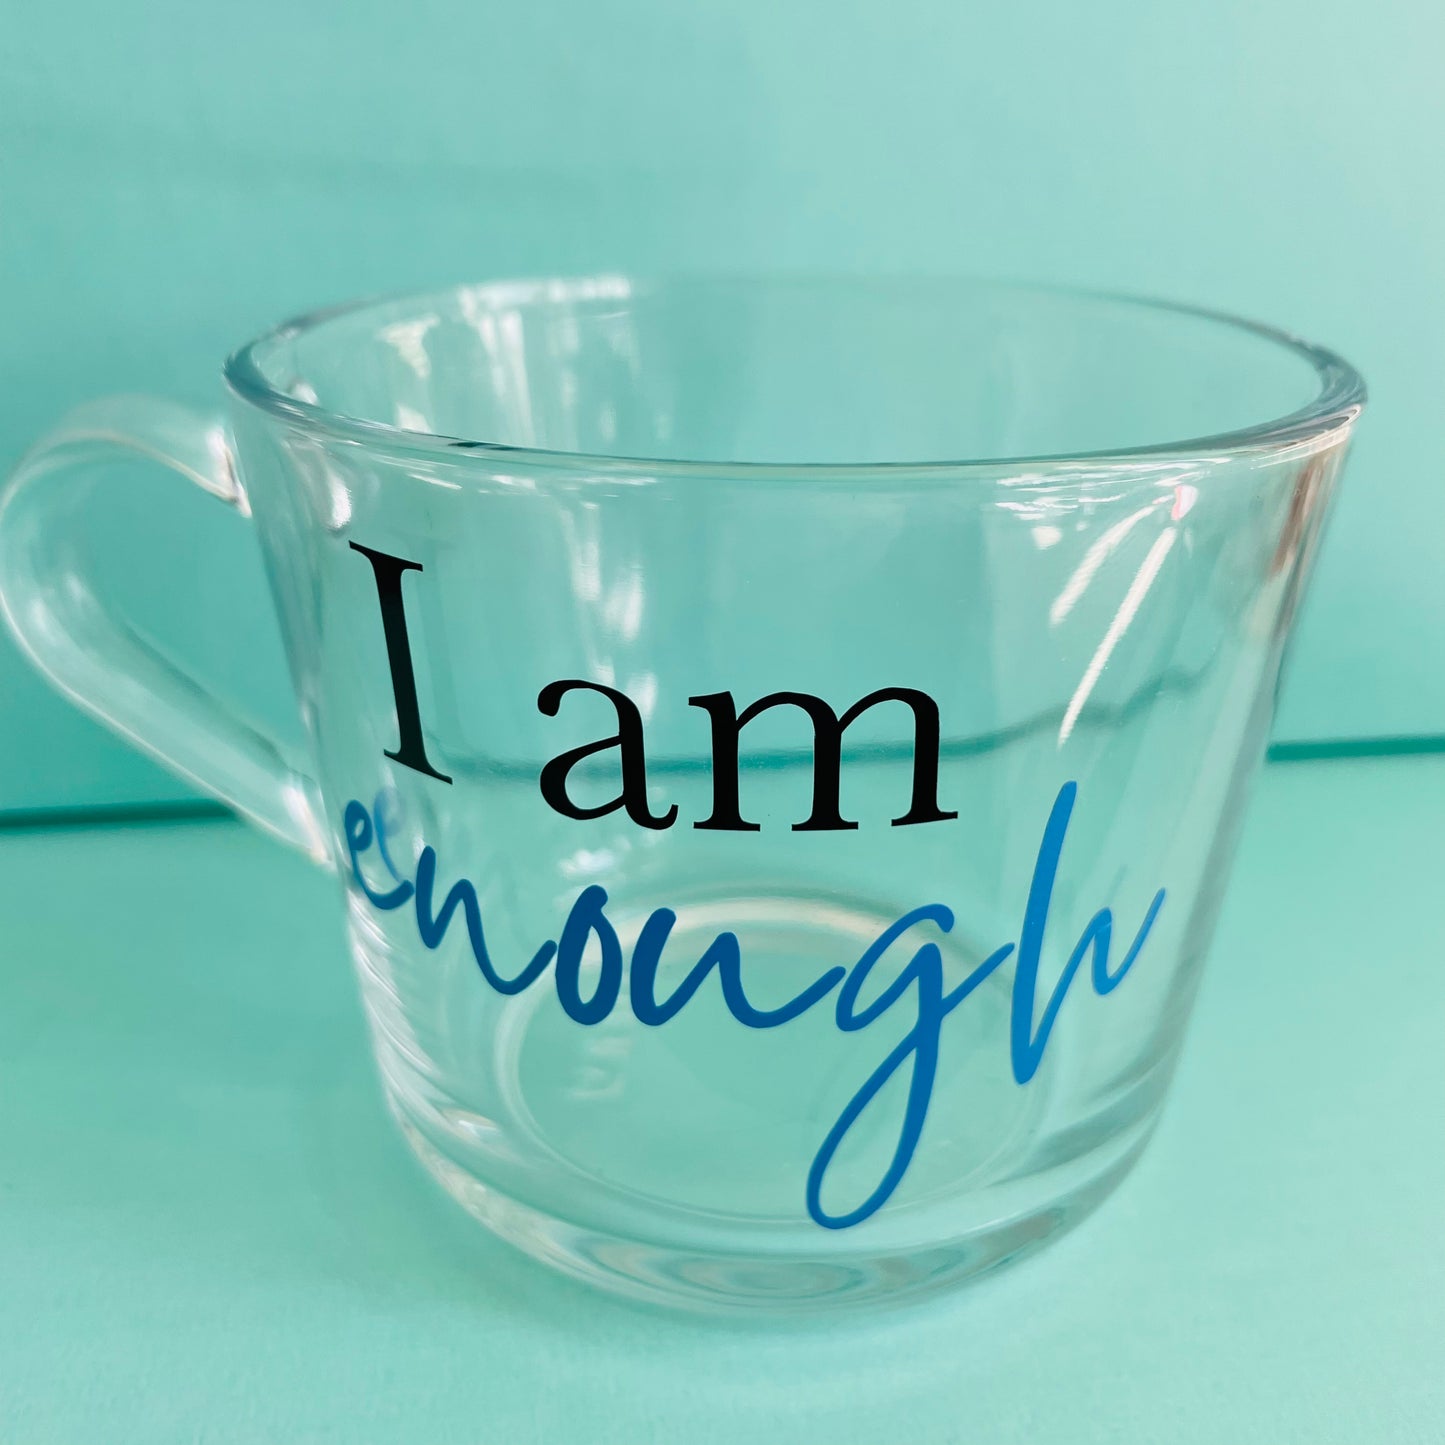 I am enough & time to relax glassware